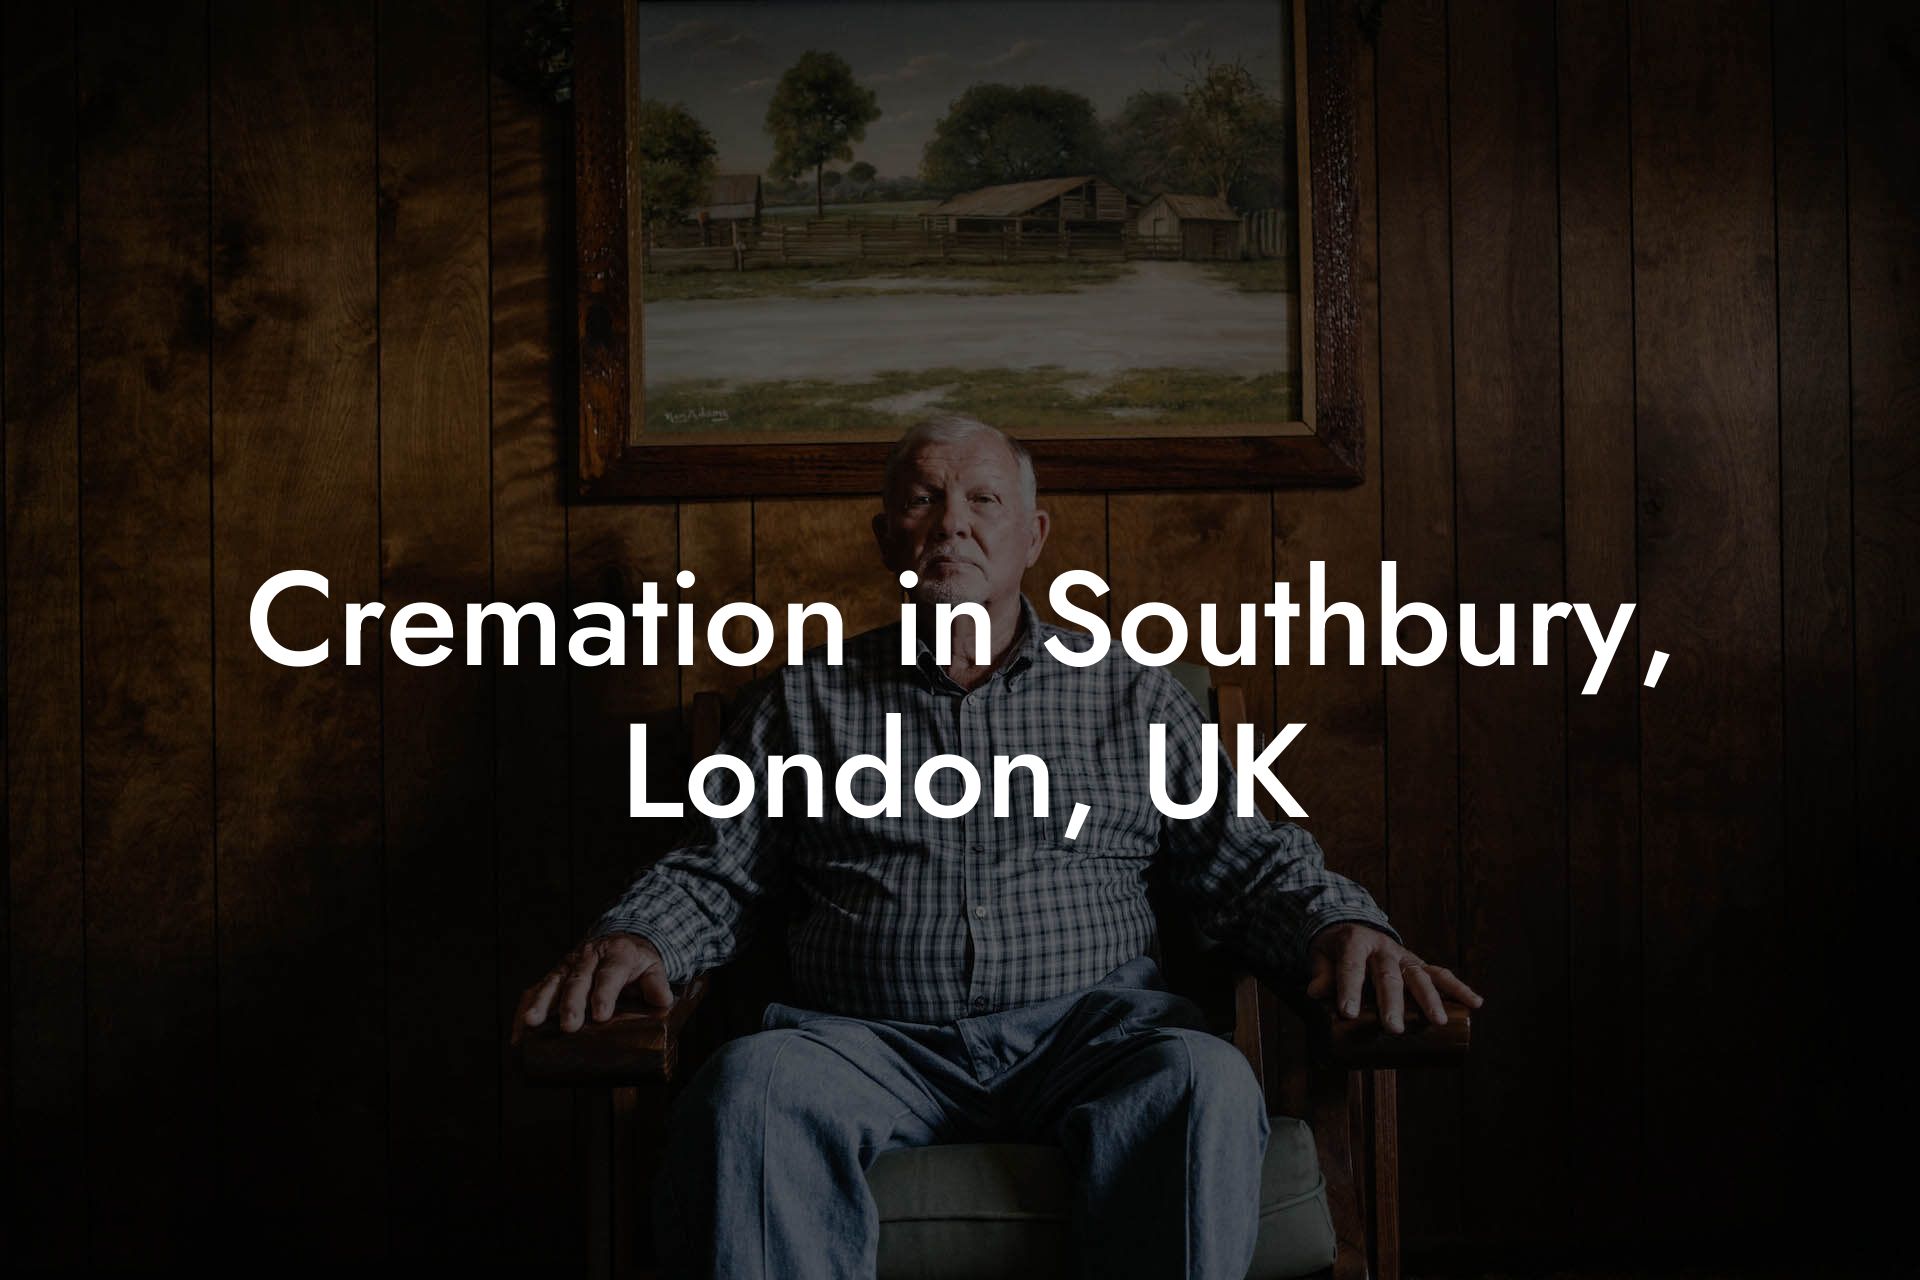 Cremation in Southbury, London, UK